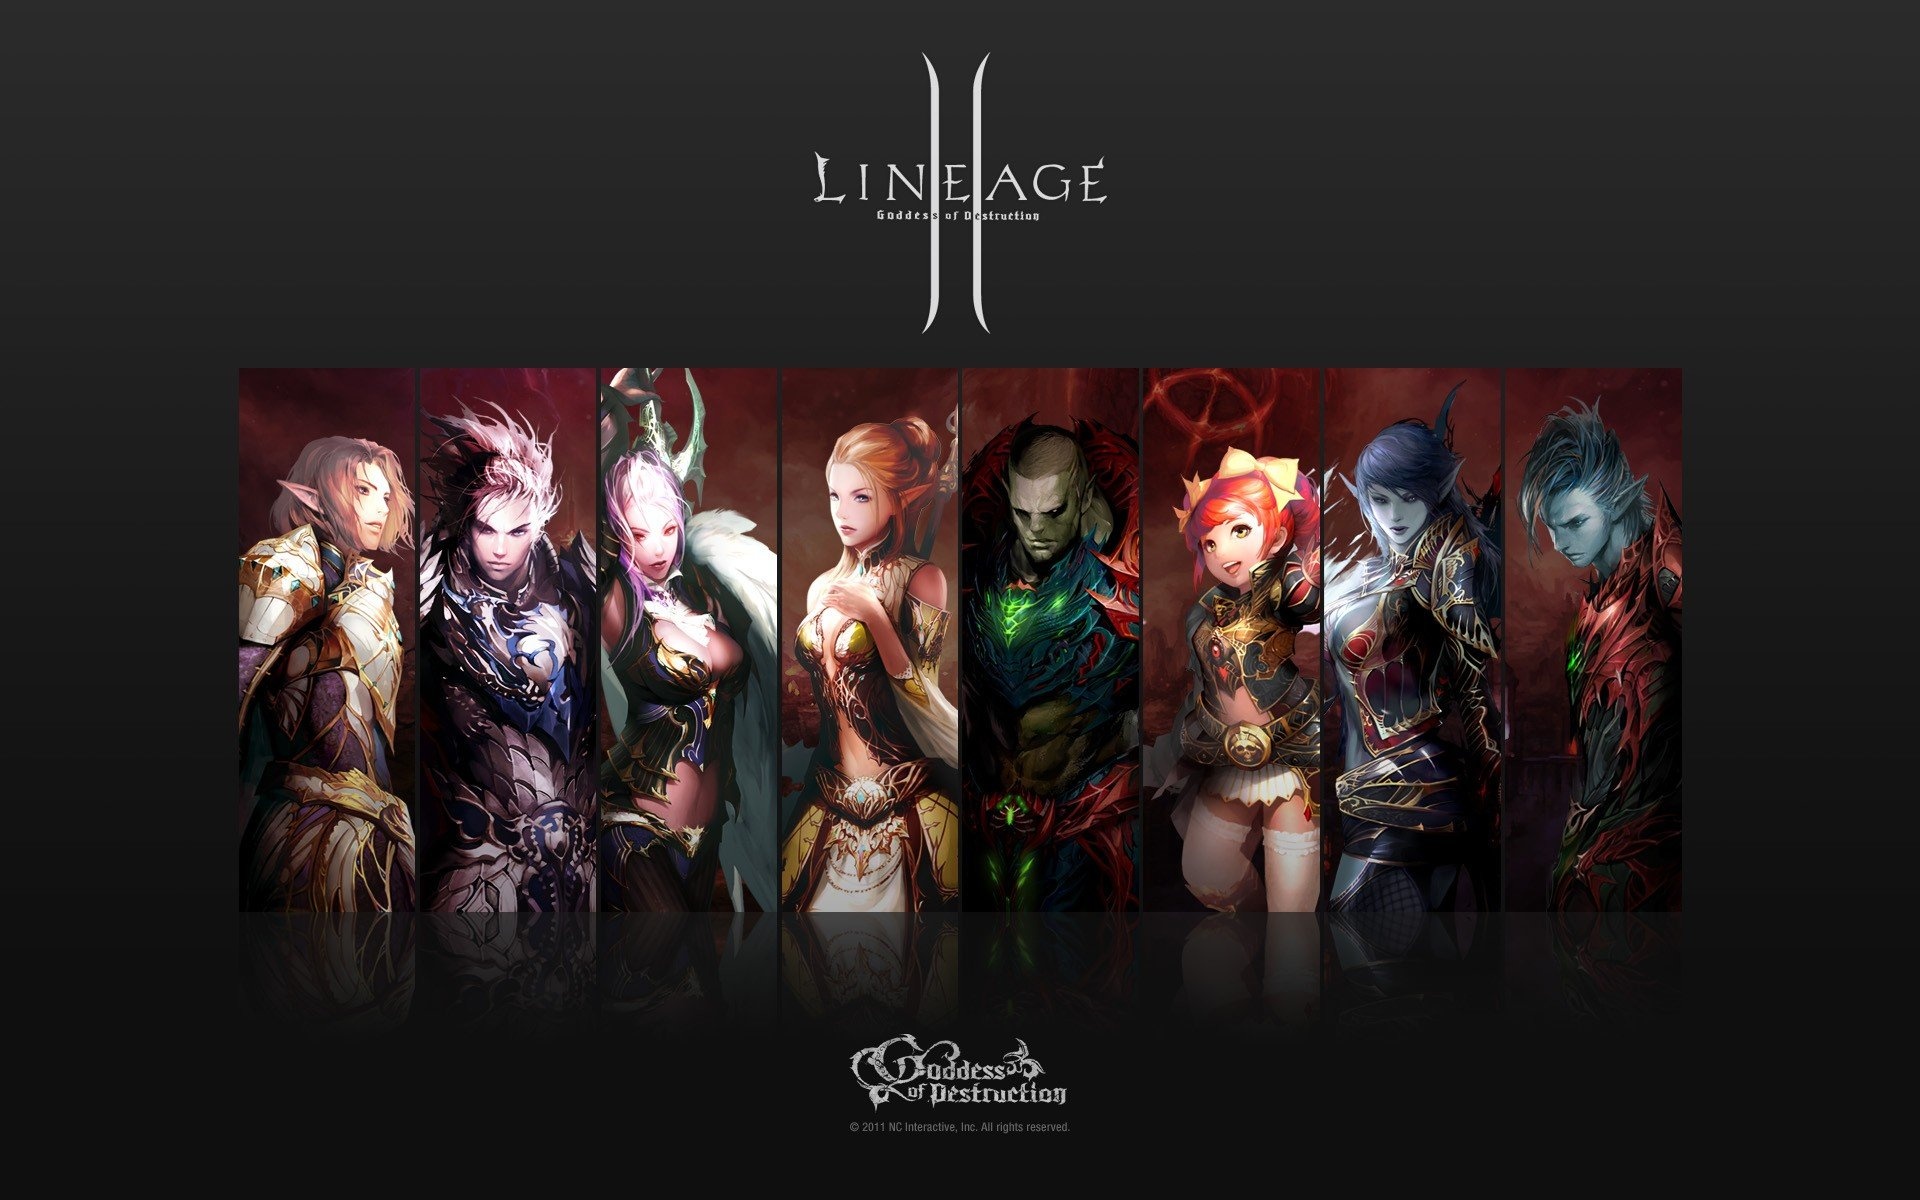 Lineage game, Gaming experts, Lineage 2 artwork, MMORPG wallpaper, 1920x1200 HD Desktop